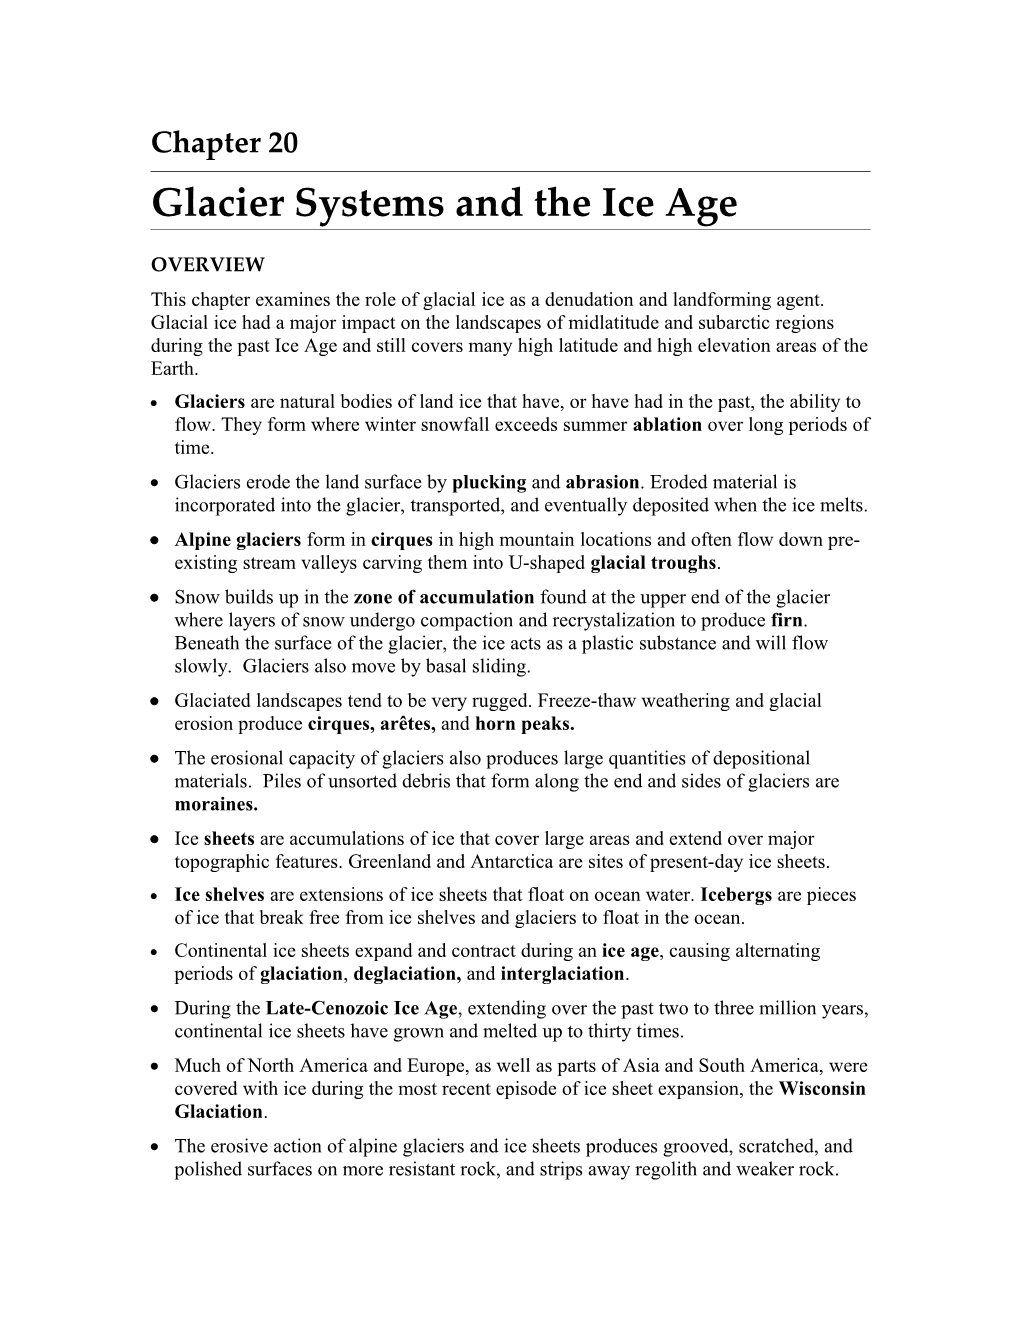 Glacier Systems and the Ice Age